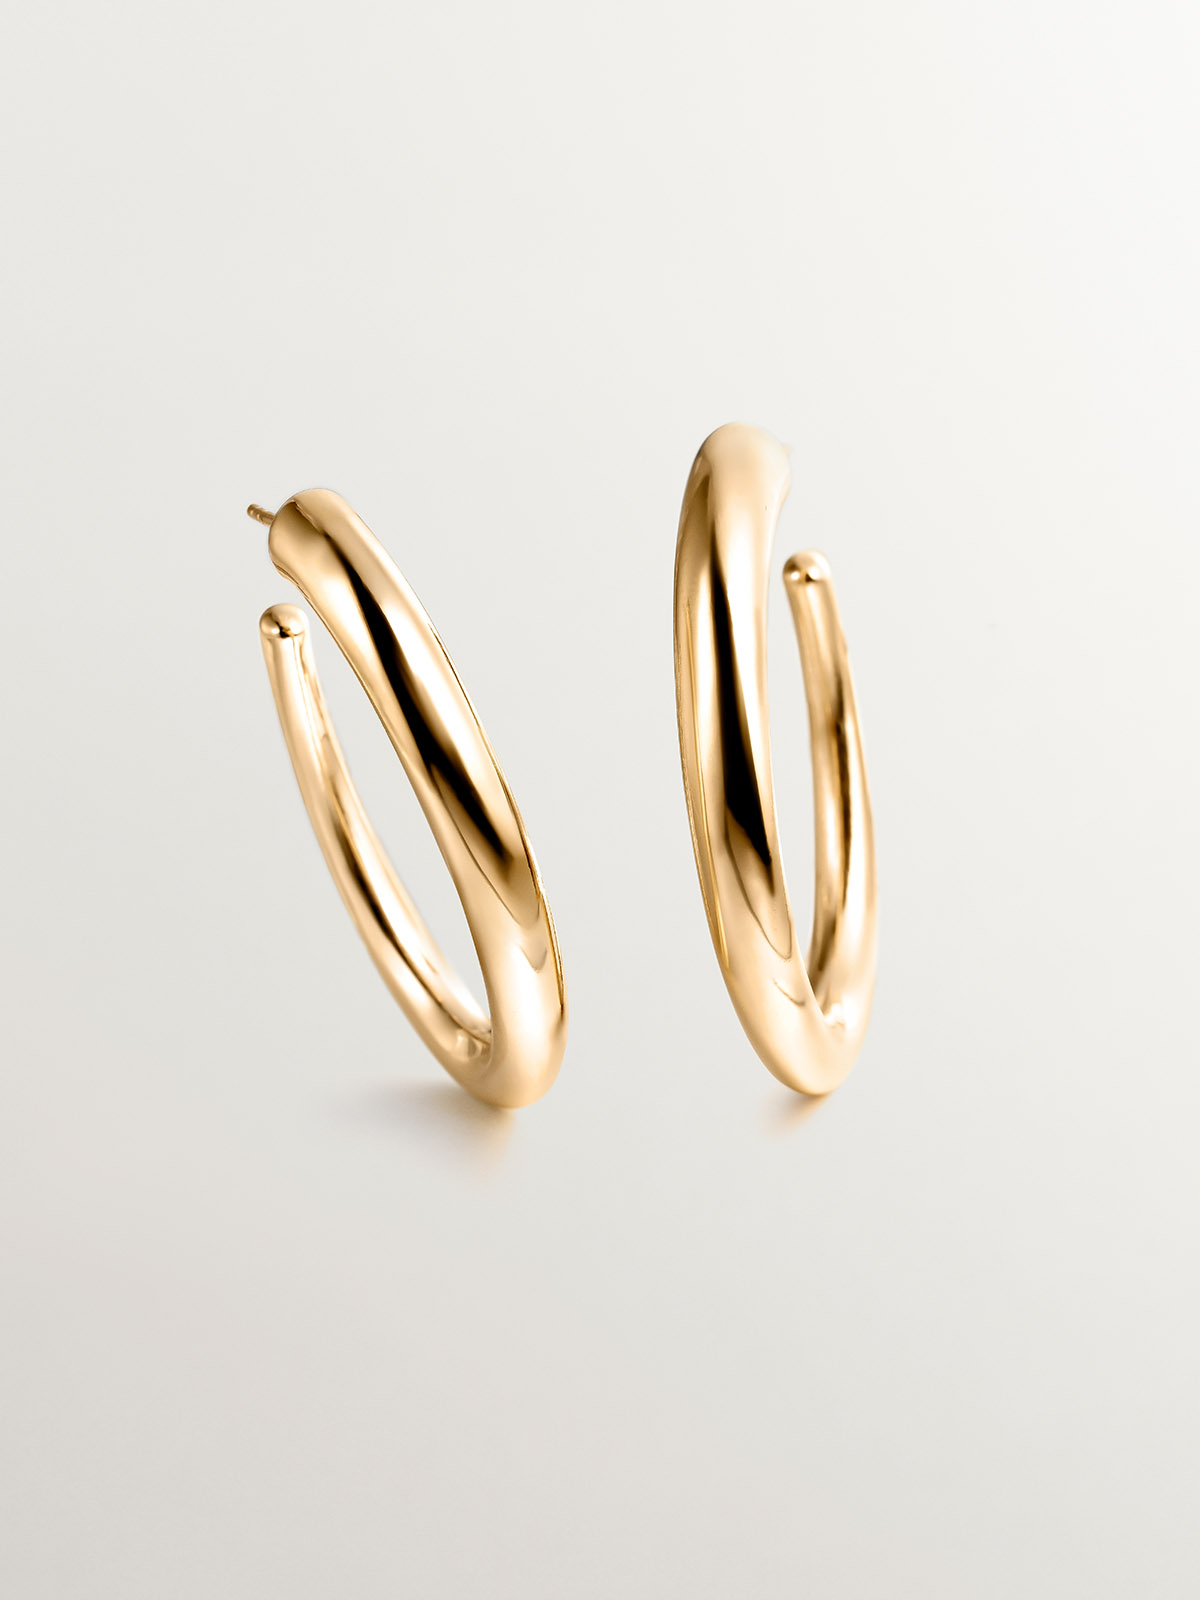 Large hoop earrings made of 925 silver, coated in 18K yellow gold, with an oval shape.